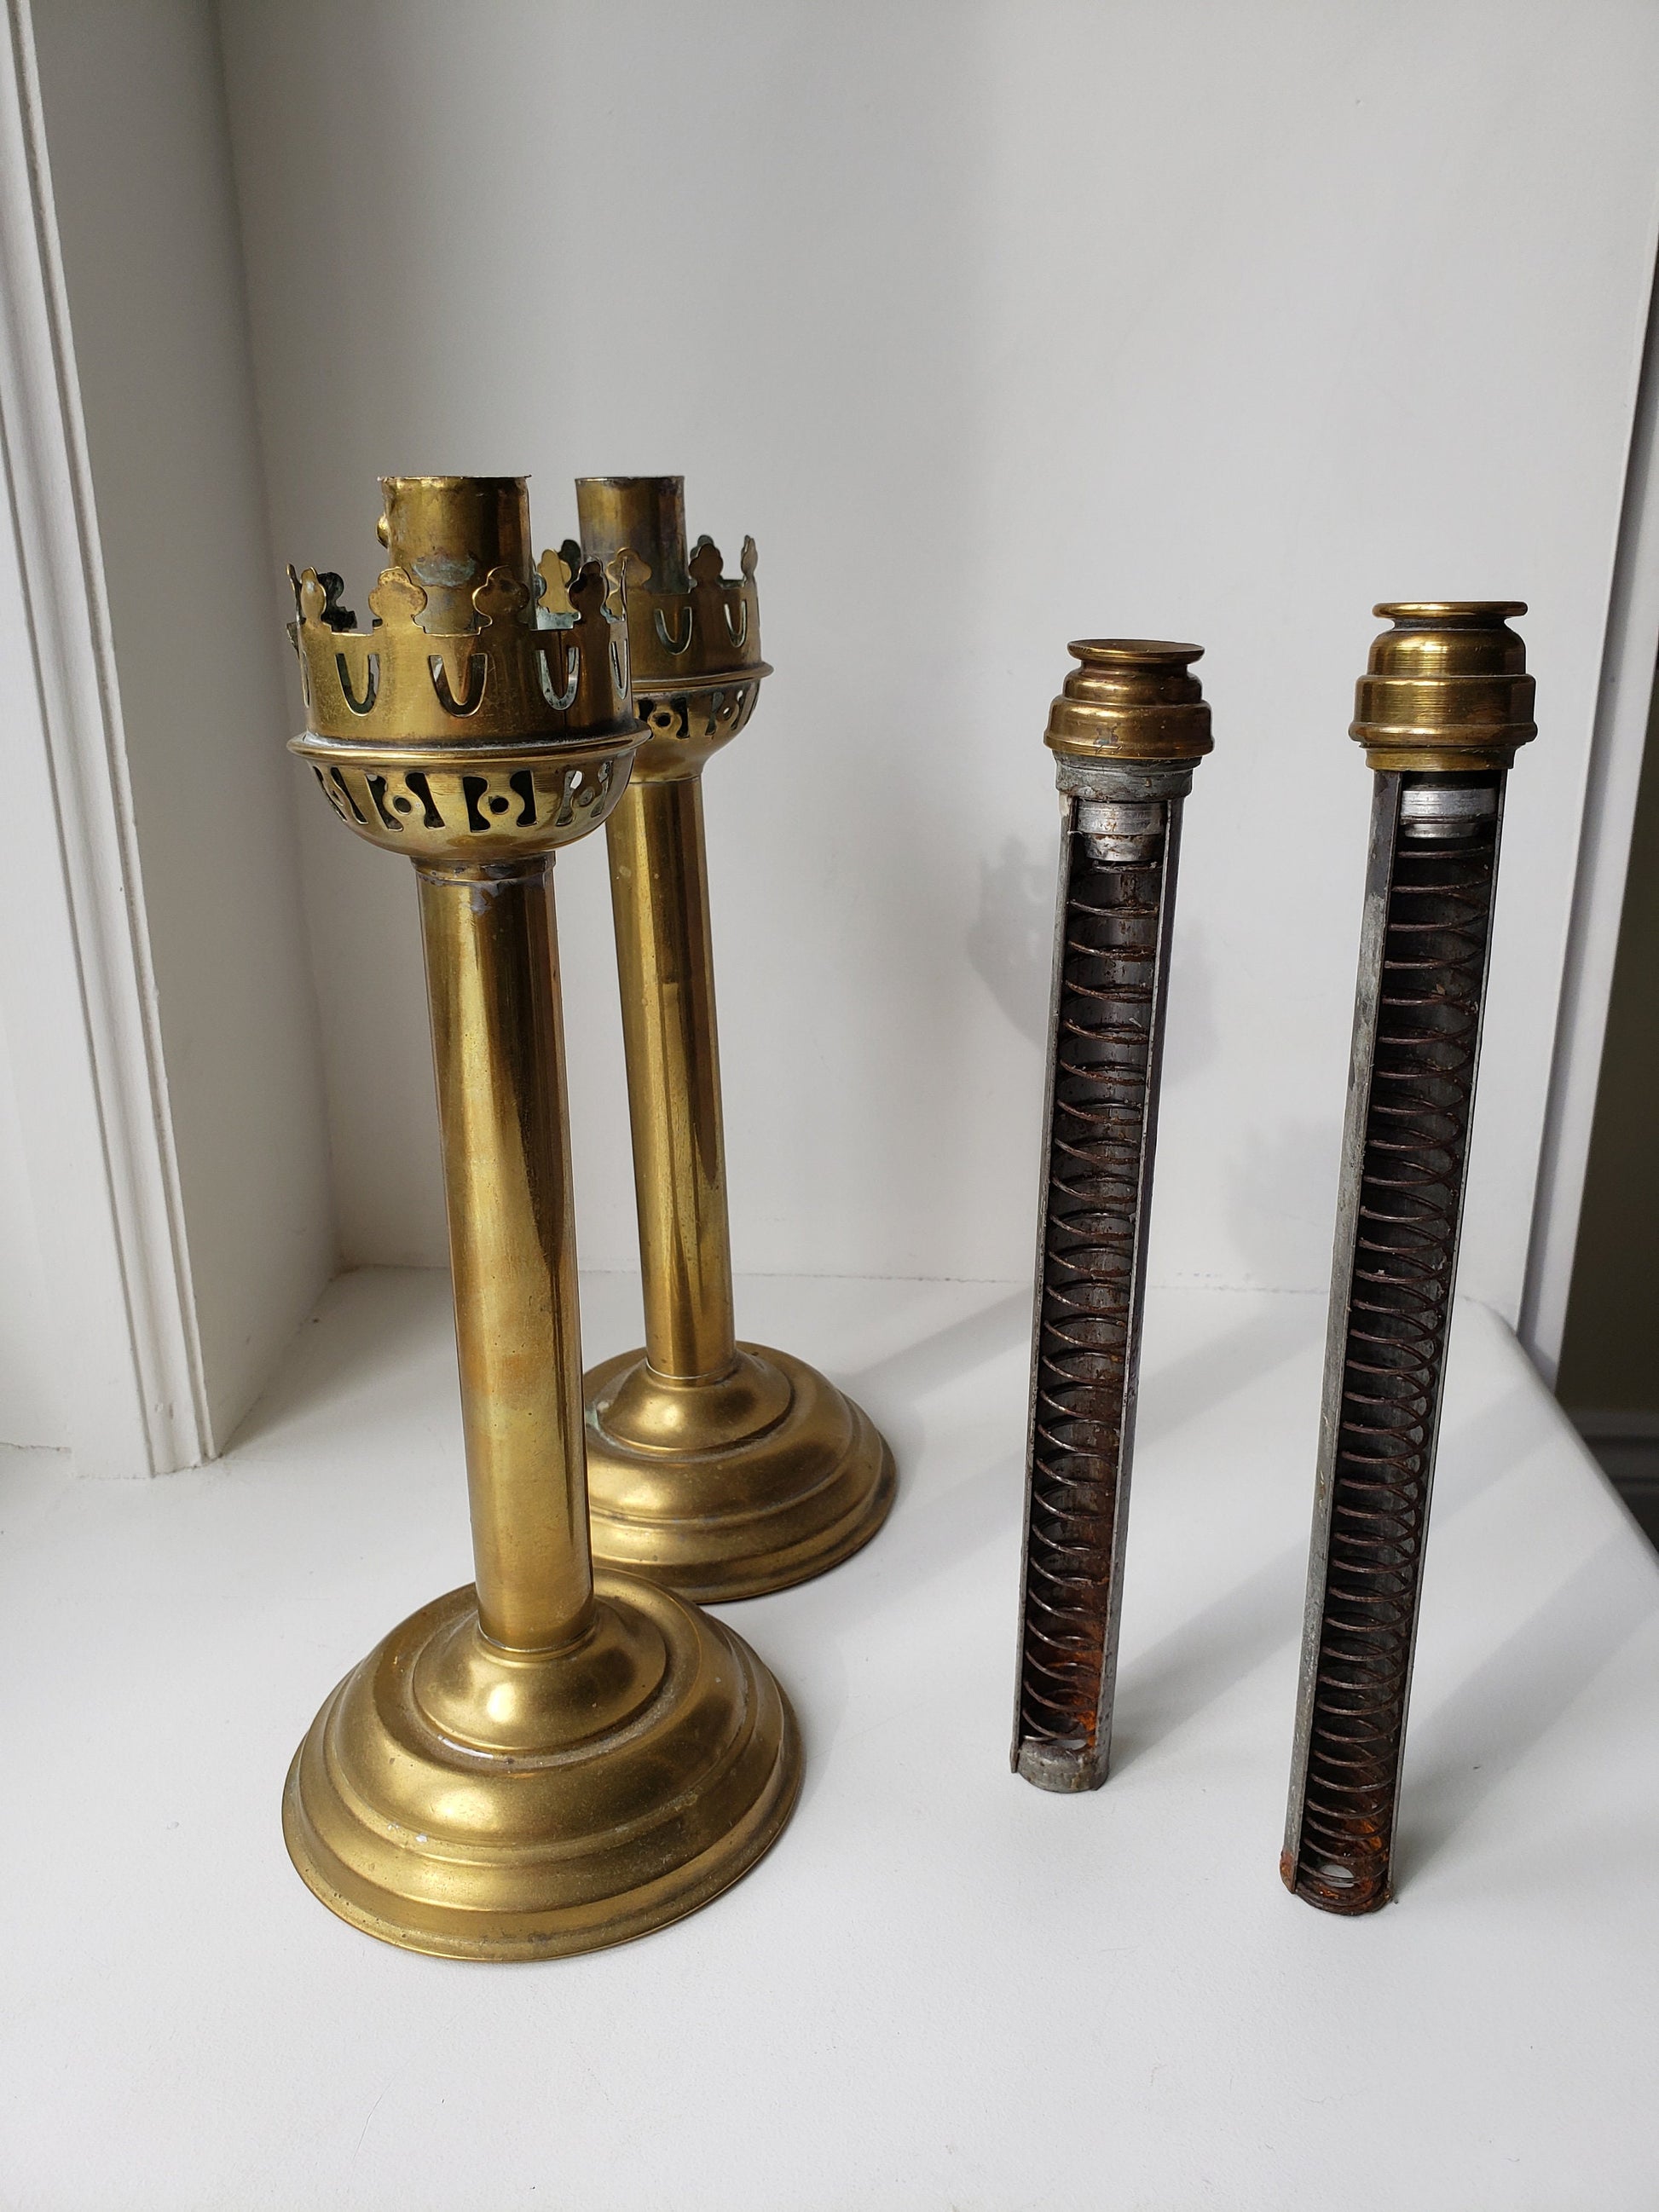 Pair of candleholders on brass stands with blown glass hurricane